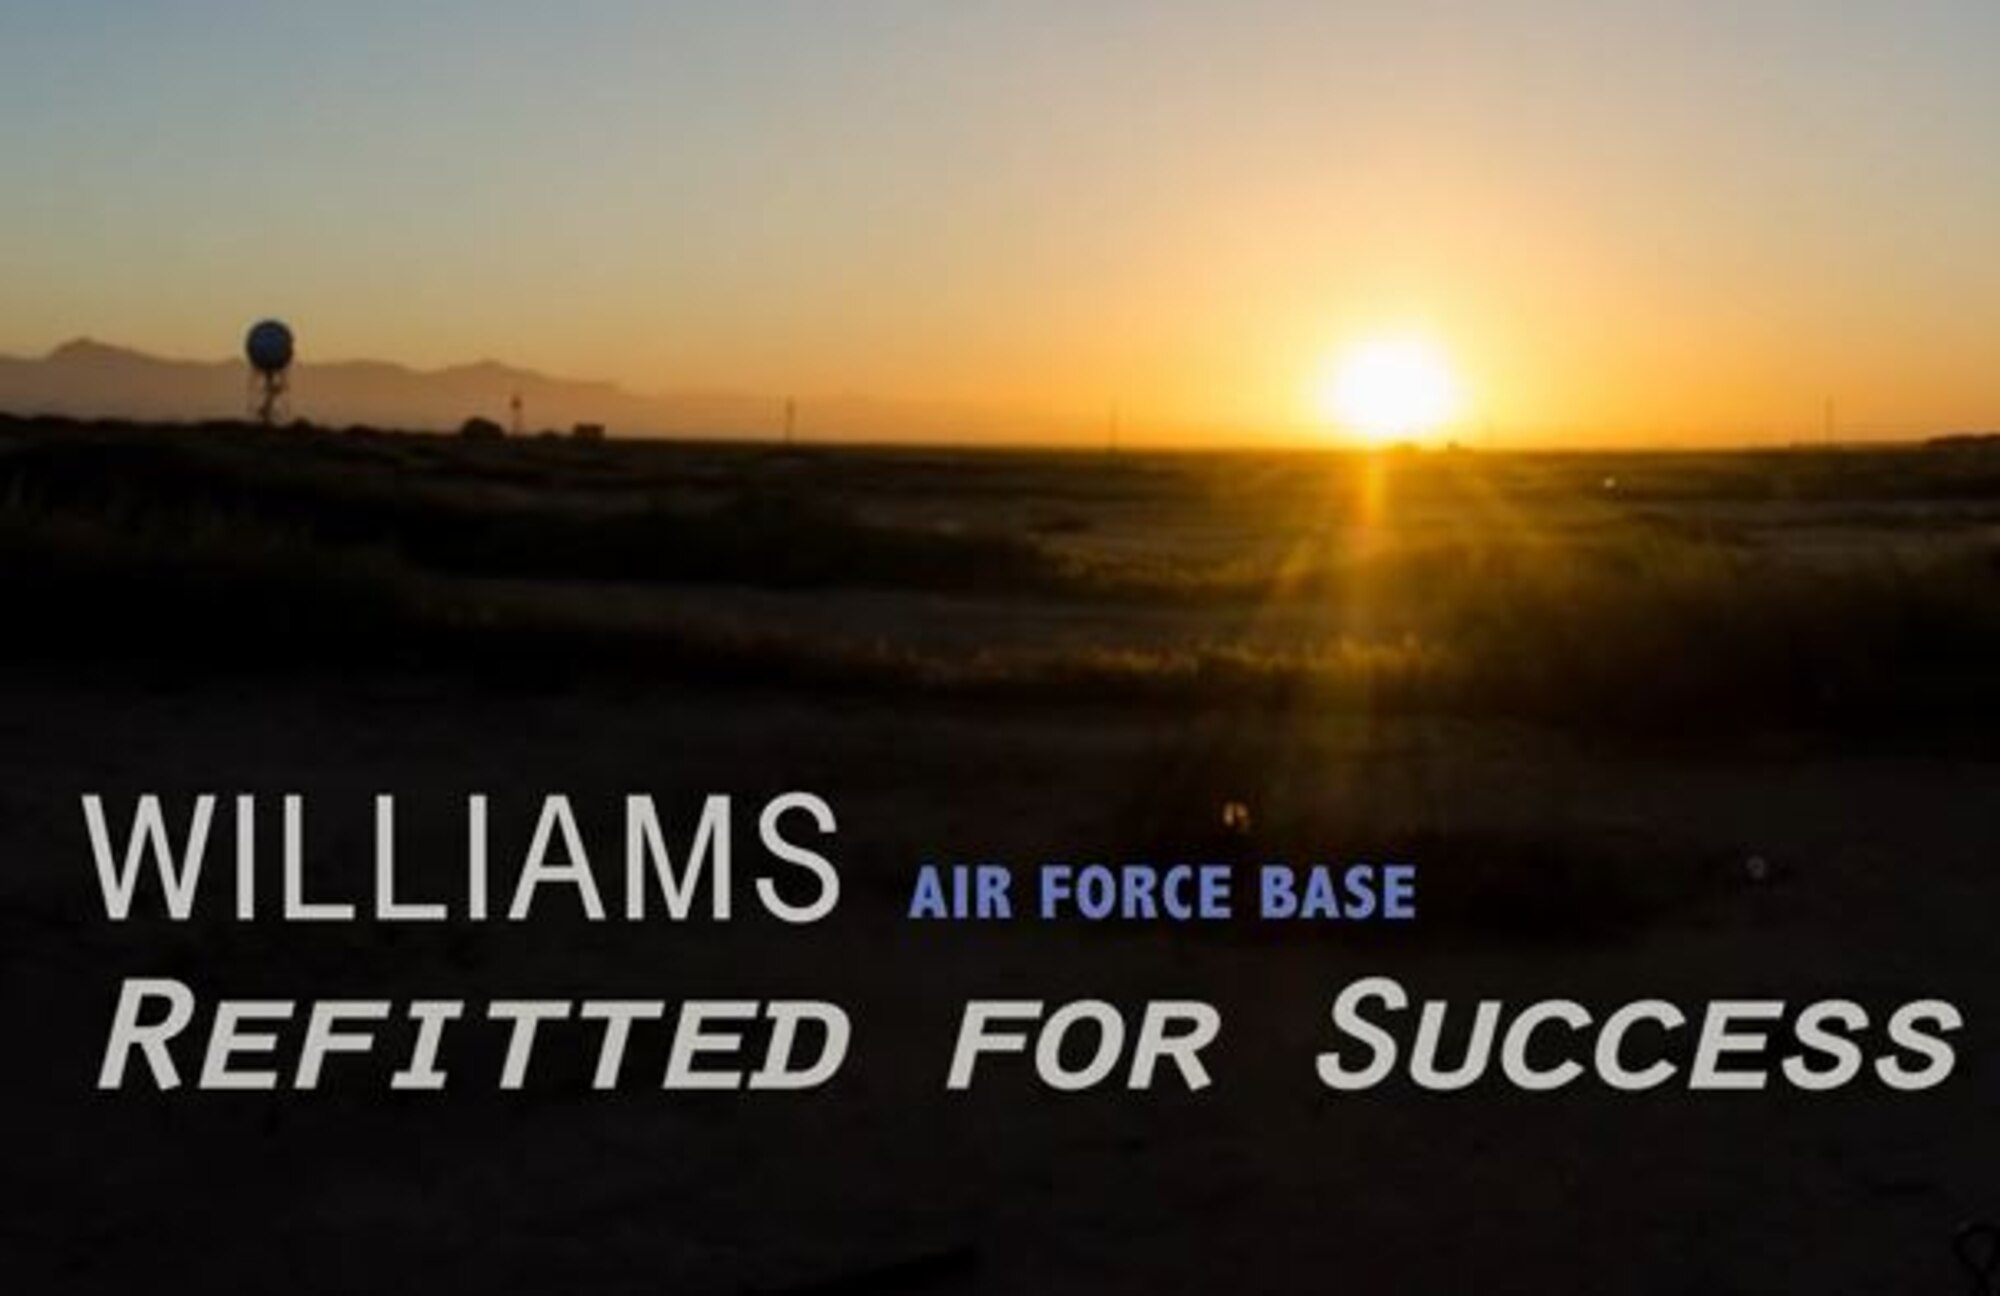 Williams Air Force Base: Refitted for success